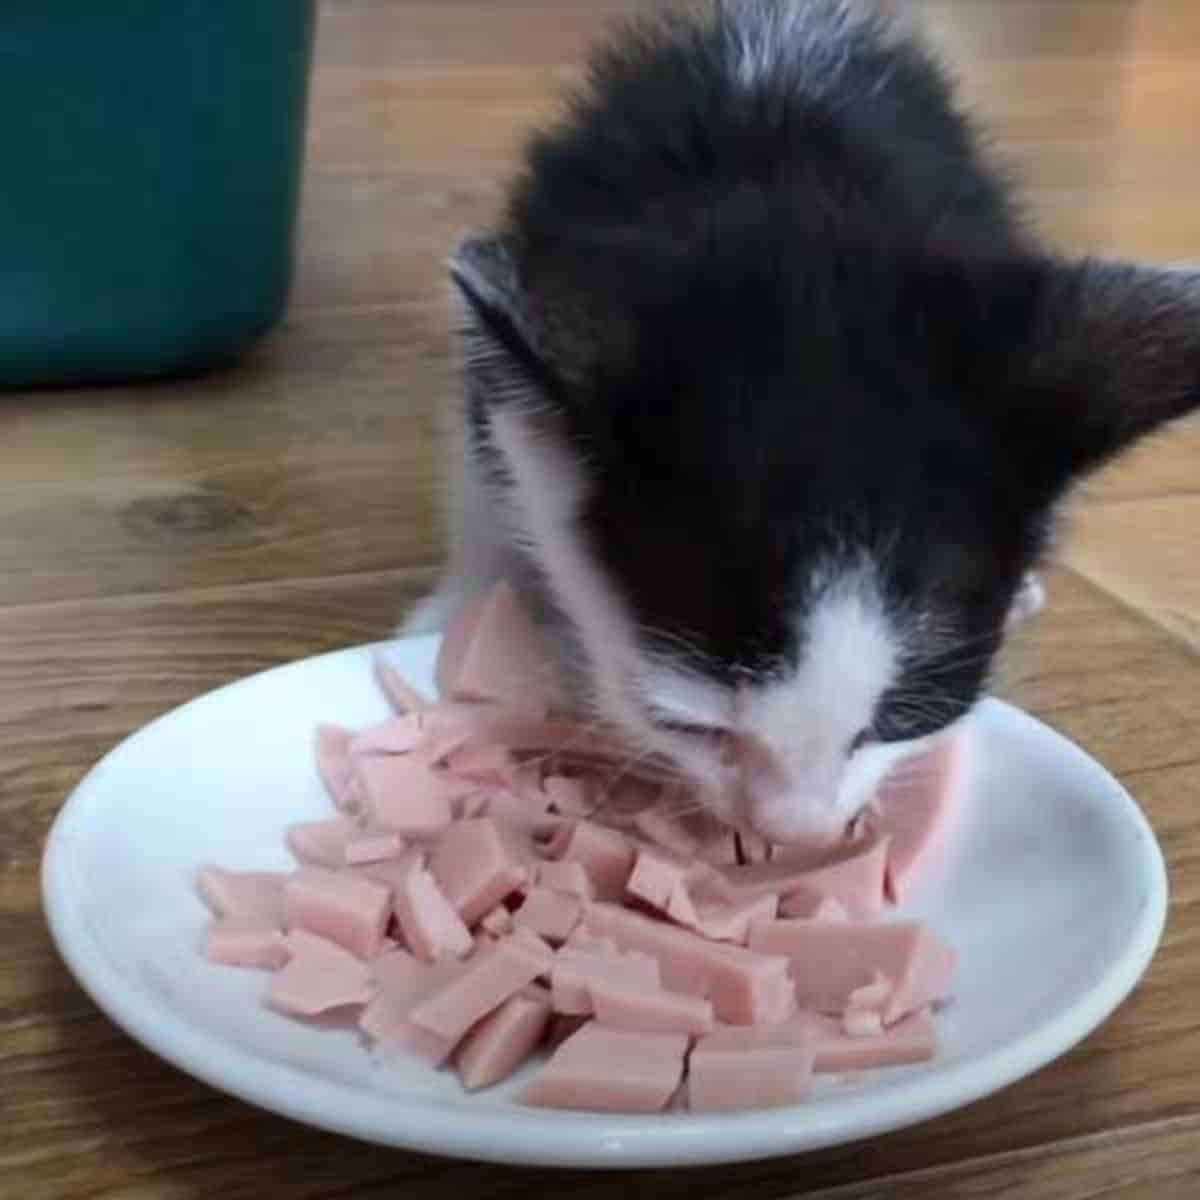 the kitten eats salami from the plate